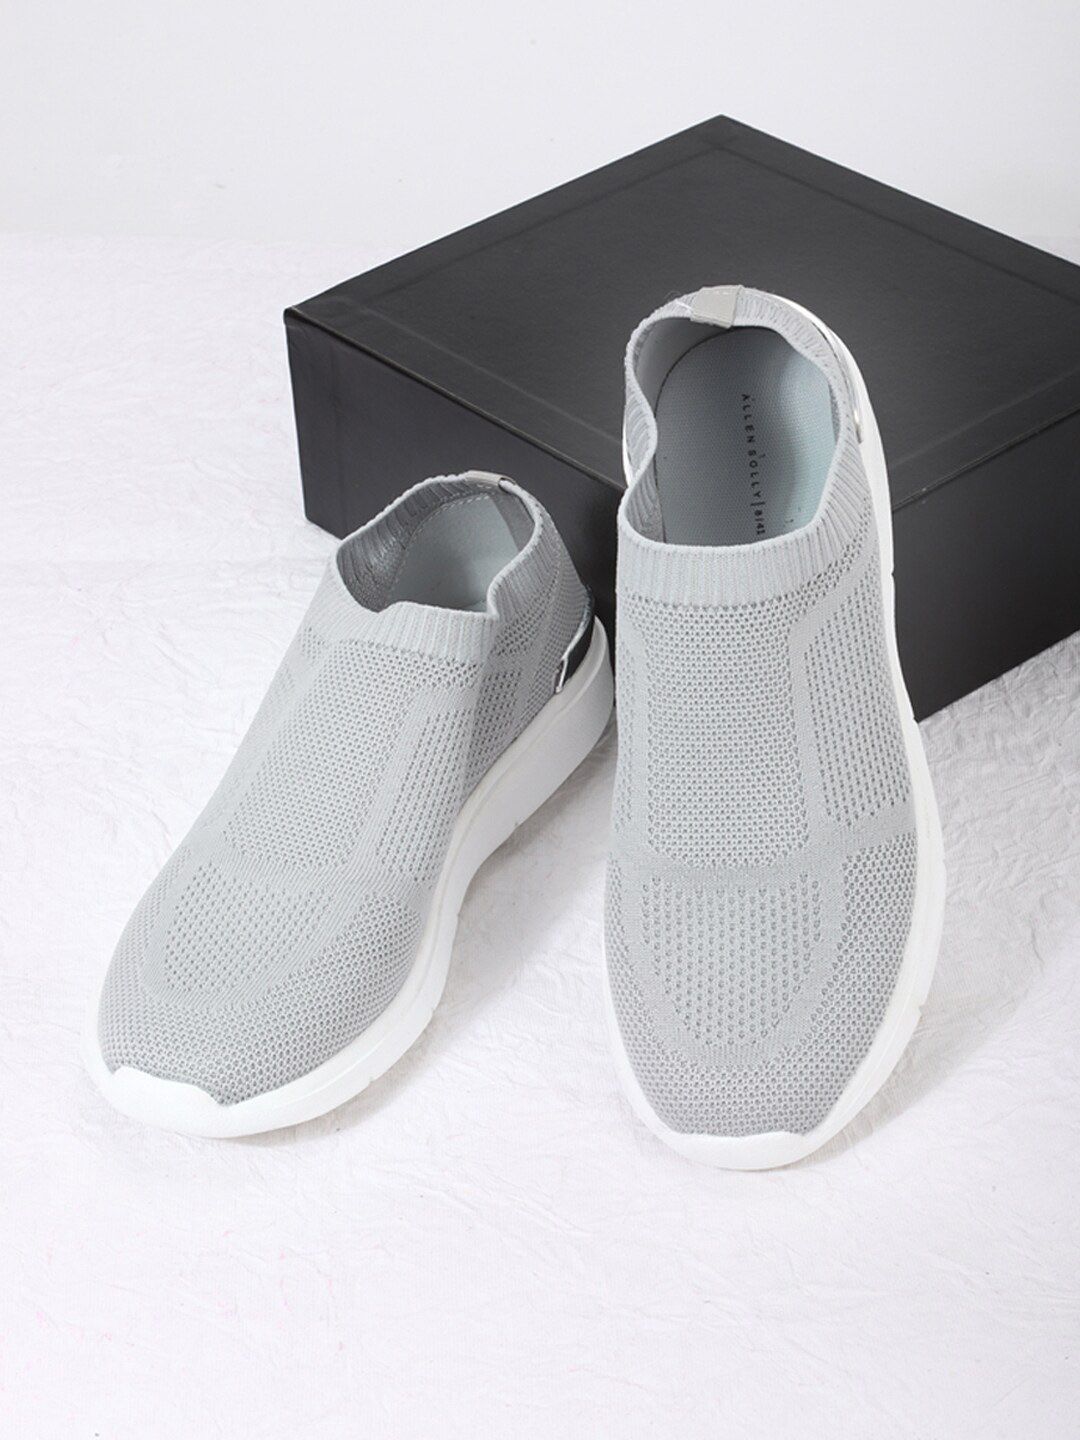 Allen Solly Woman Grey Woven Design PU Slip-On Sneakers Price in India